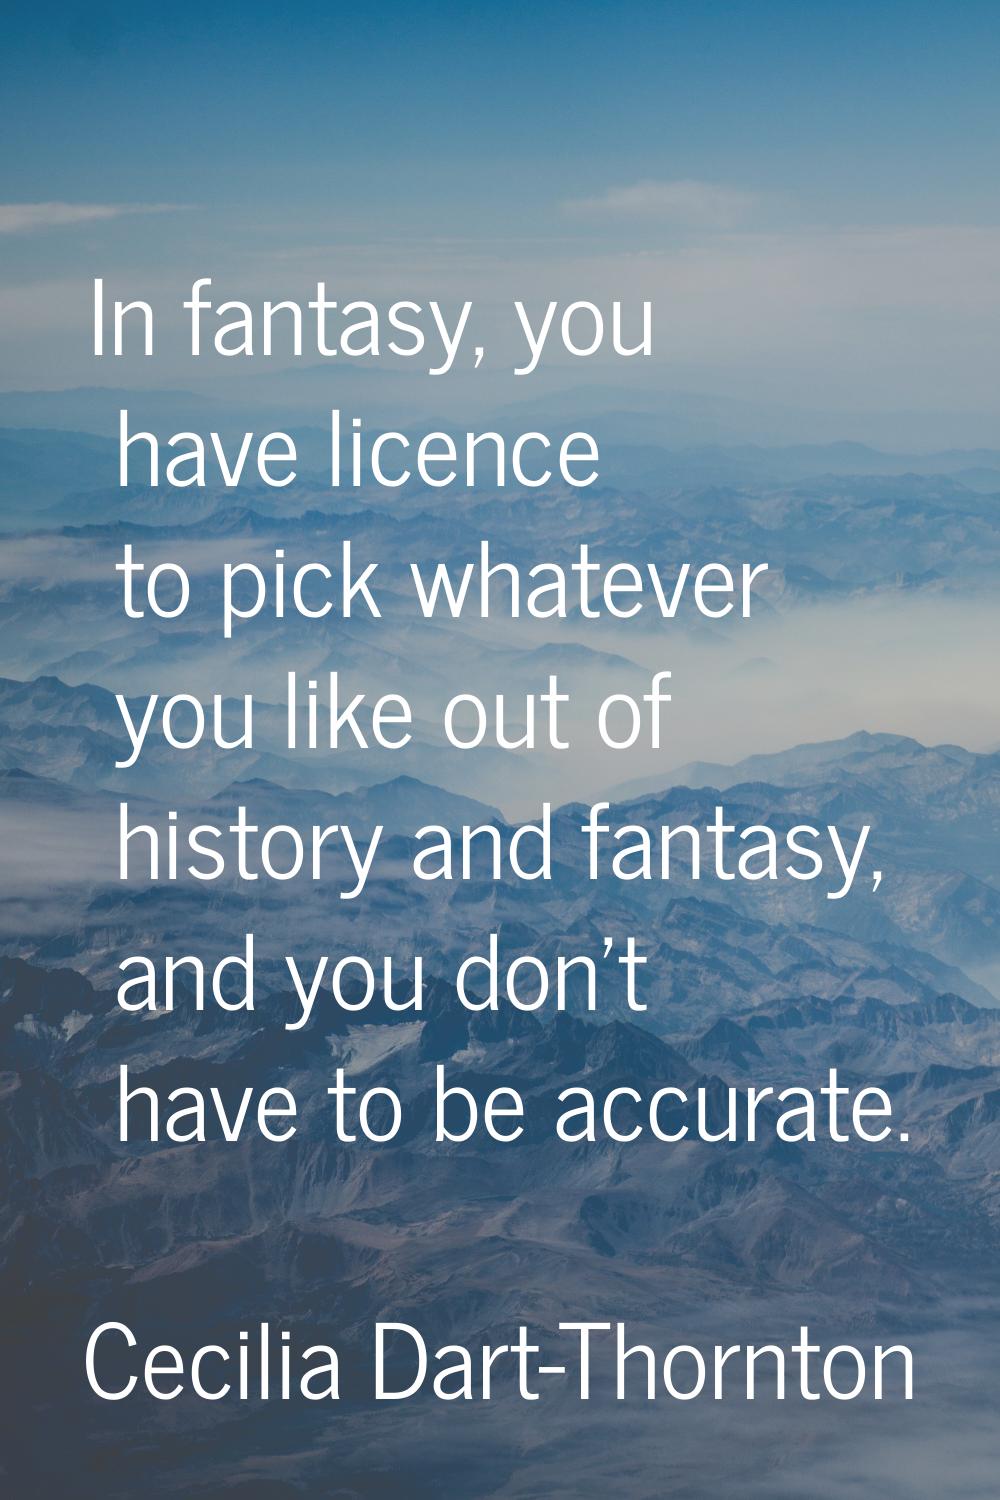 In fantasy, you have licence to pick whatever you like out of history and fantasy, and you don't ha